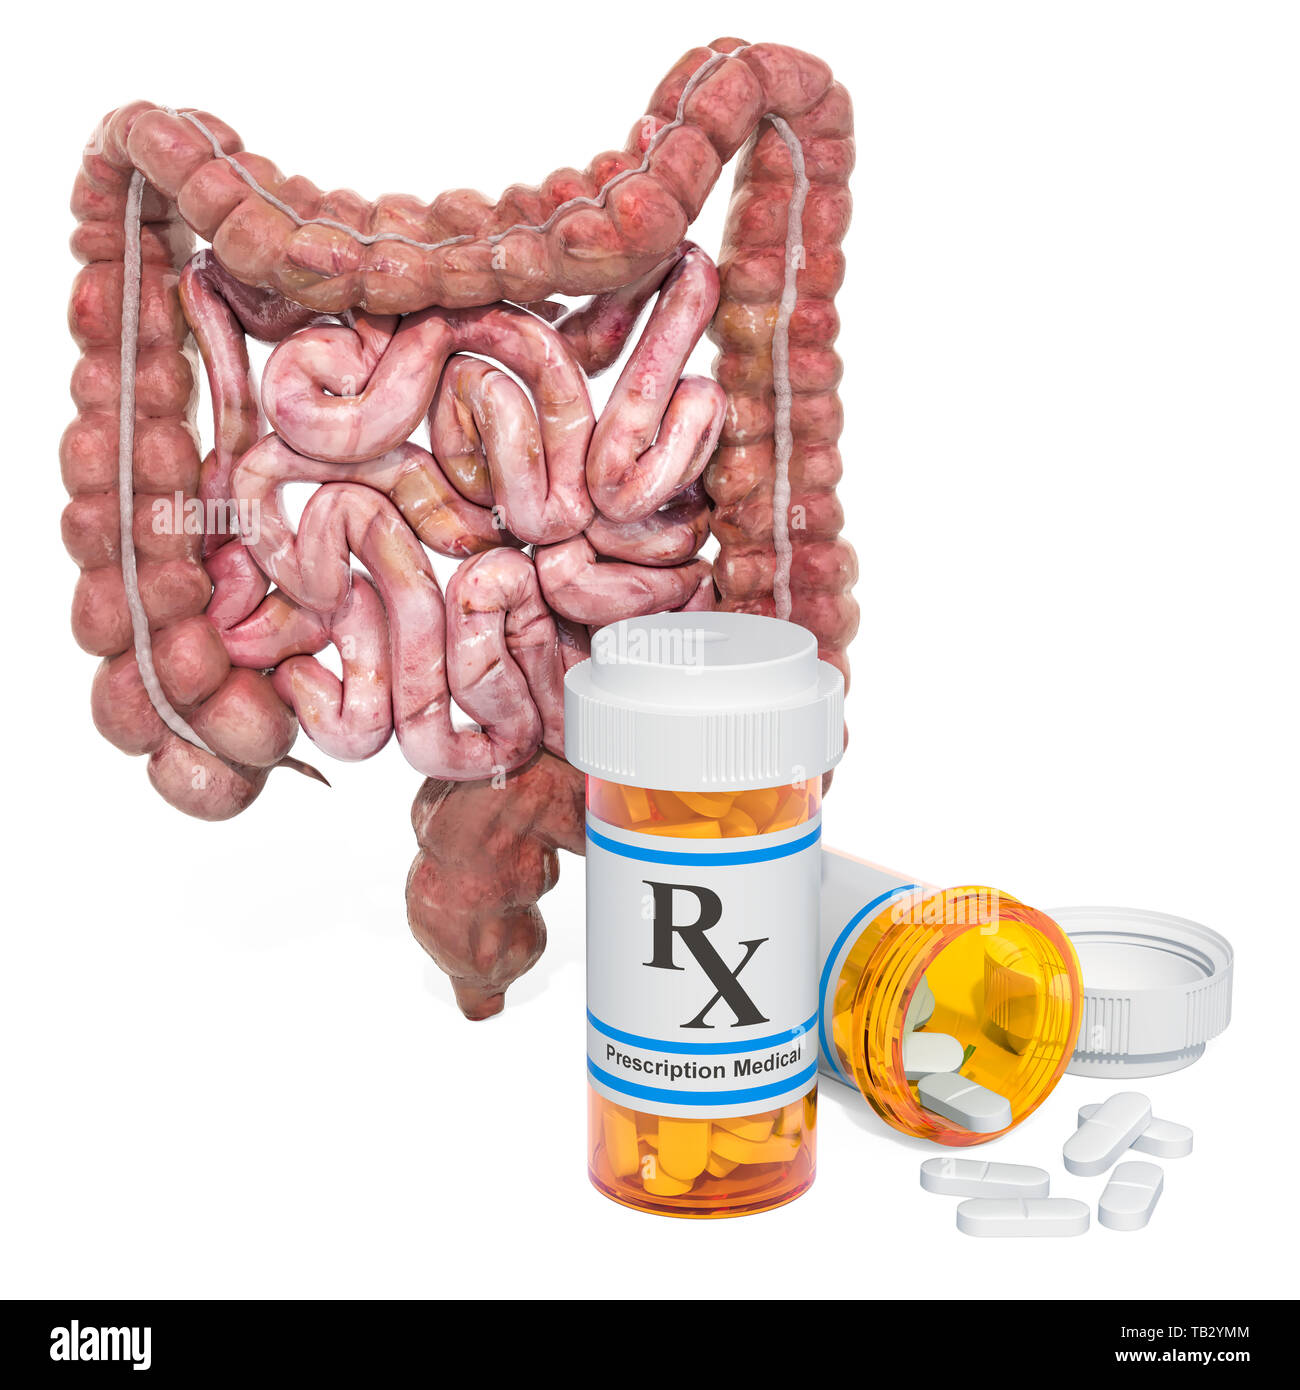 Bowel and drugs concept. Human intestines with medical bottles and pills, 3D rendering isolated on white background Stock Photo